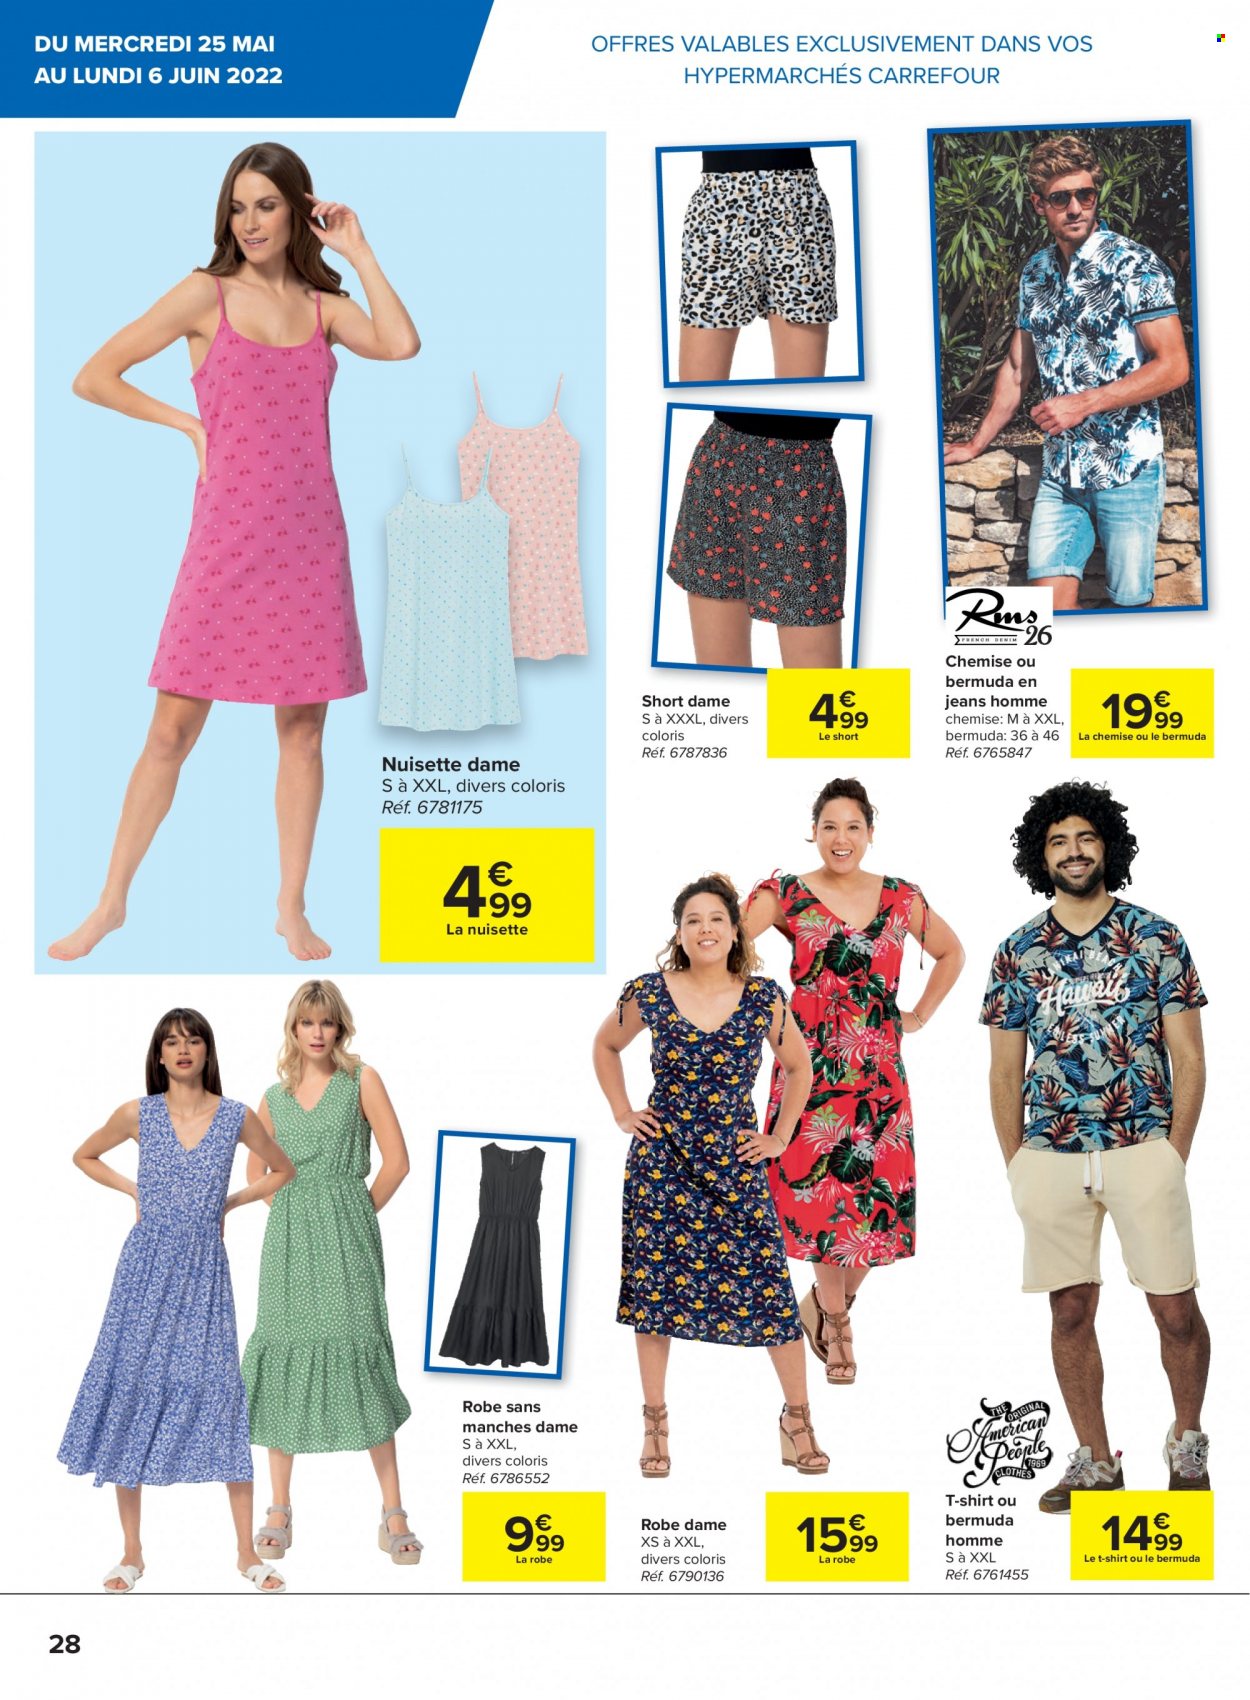 Catalogue Carrefour hypermarkt - 25.5.2022 - 31.5.2022. Page 28.